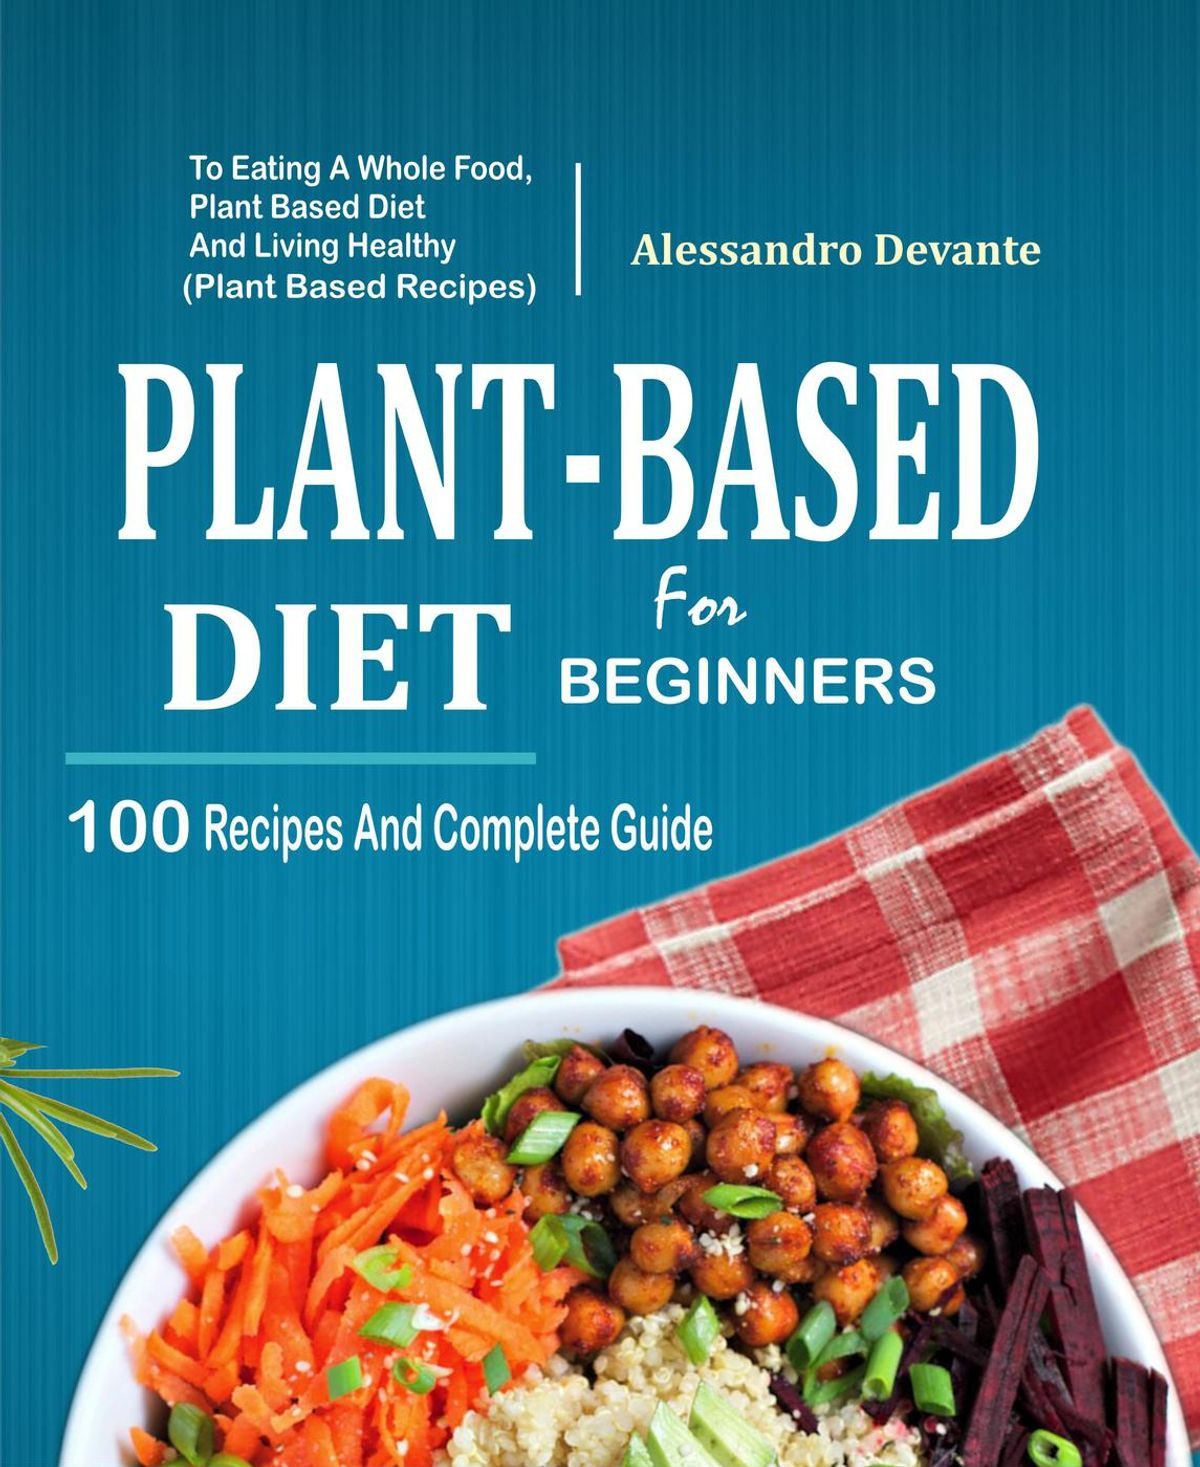 Plant Based Diet Recipes For Beginners
 Plant Based Diet For Beginners 100 Recipes And plete